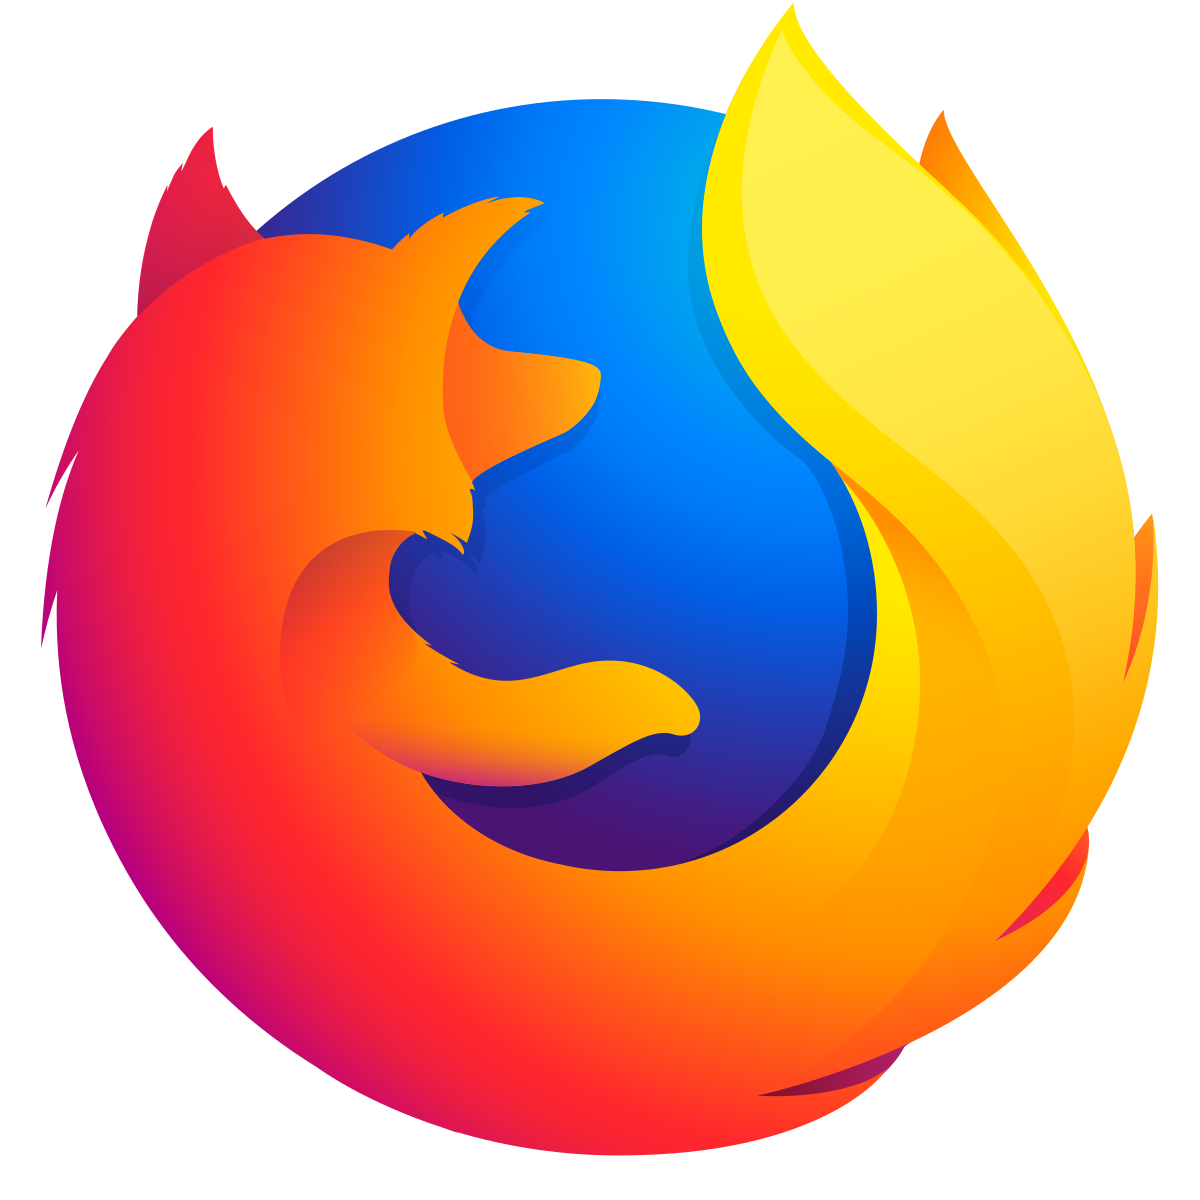 Some reasons to consider using Firefox